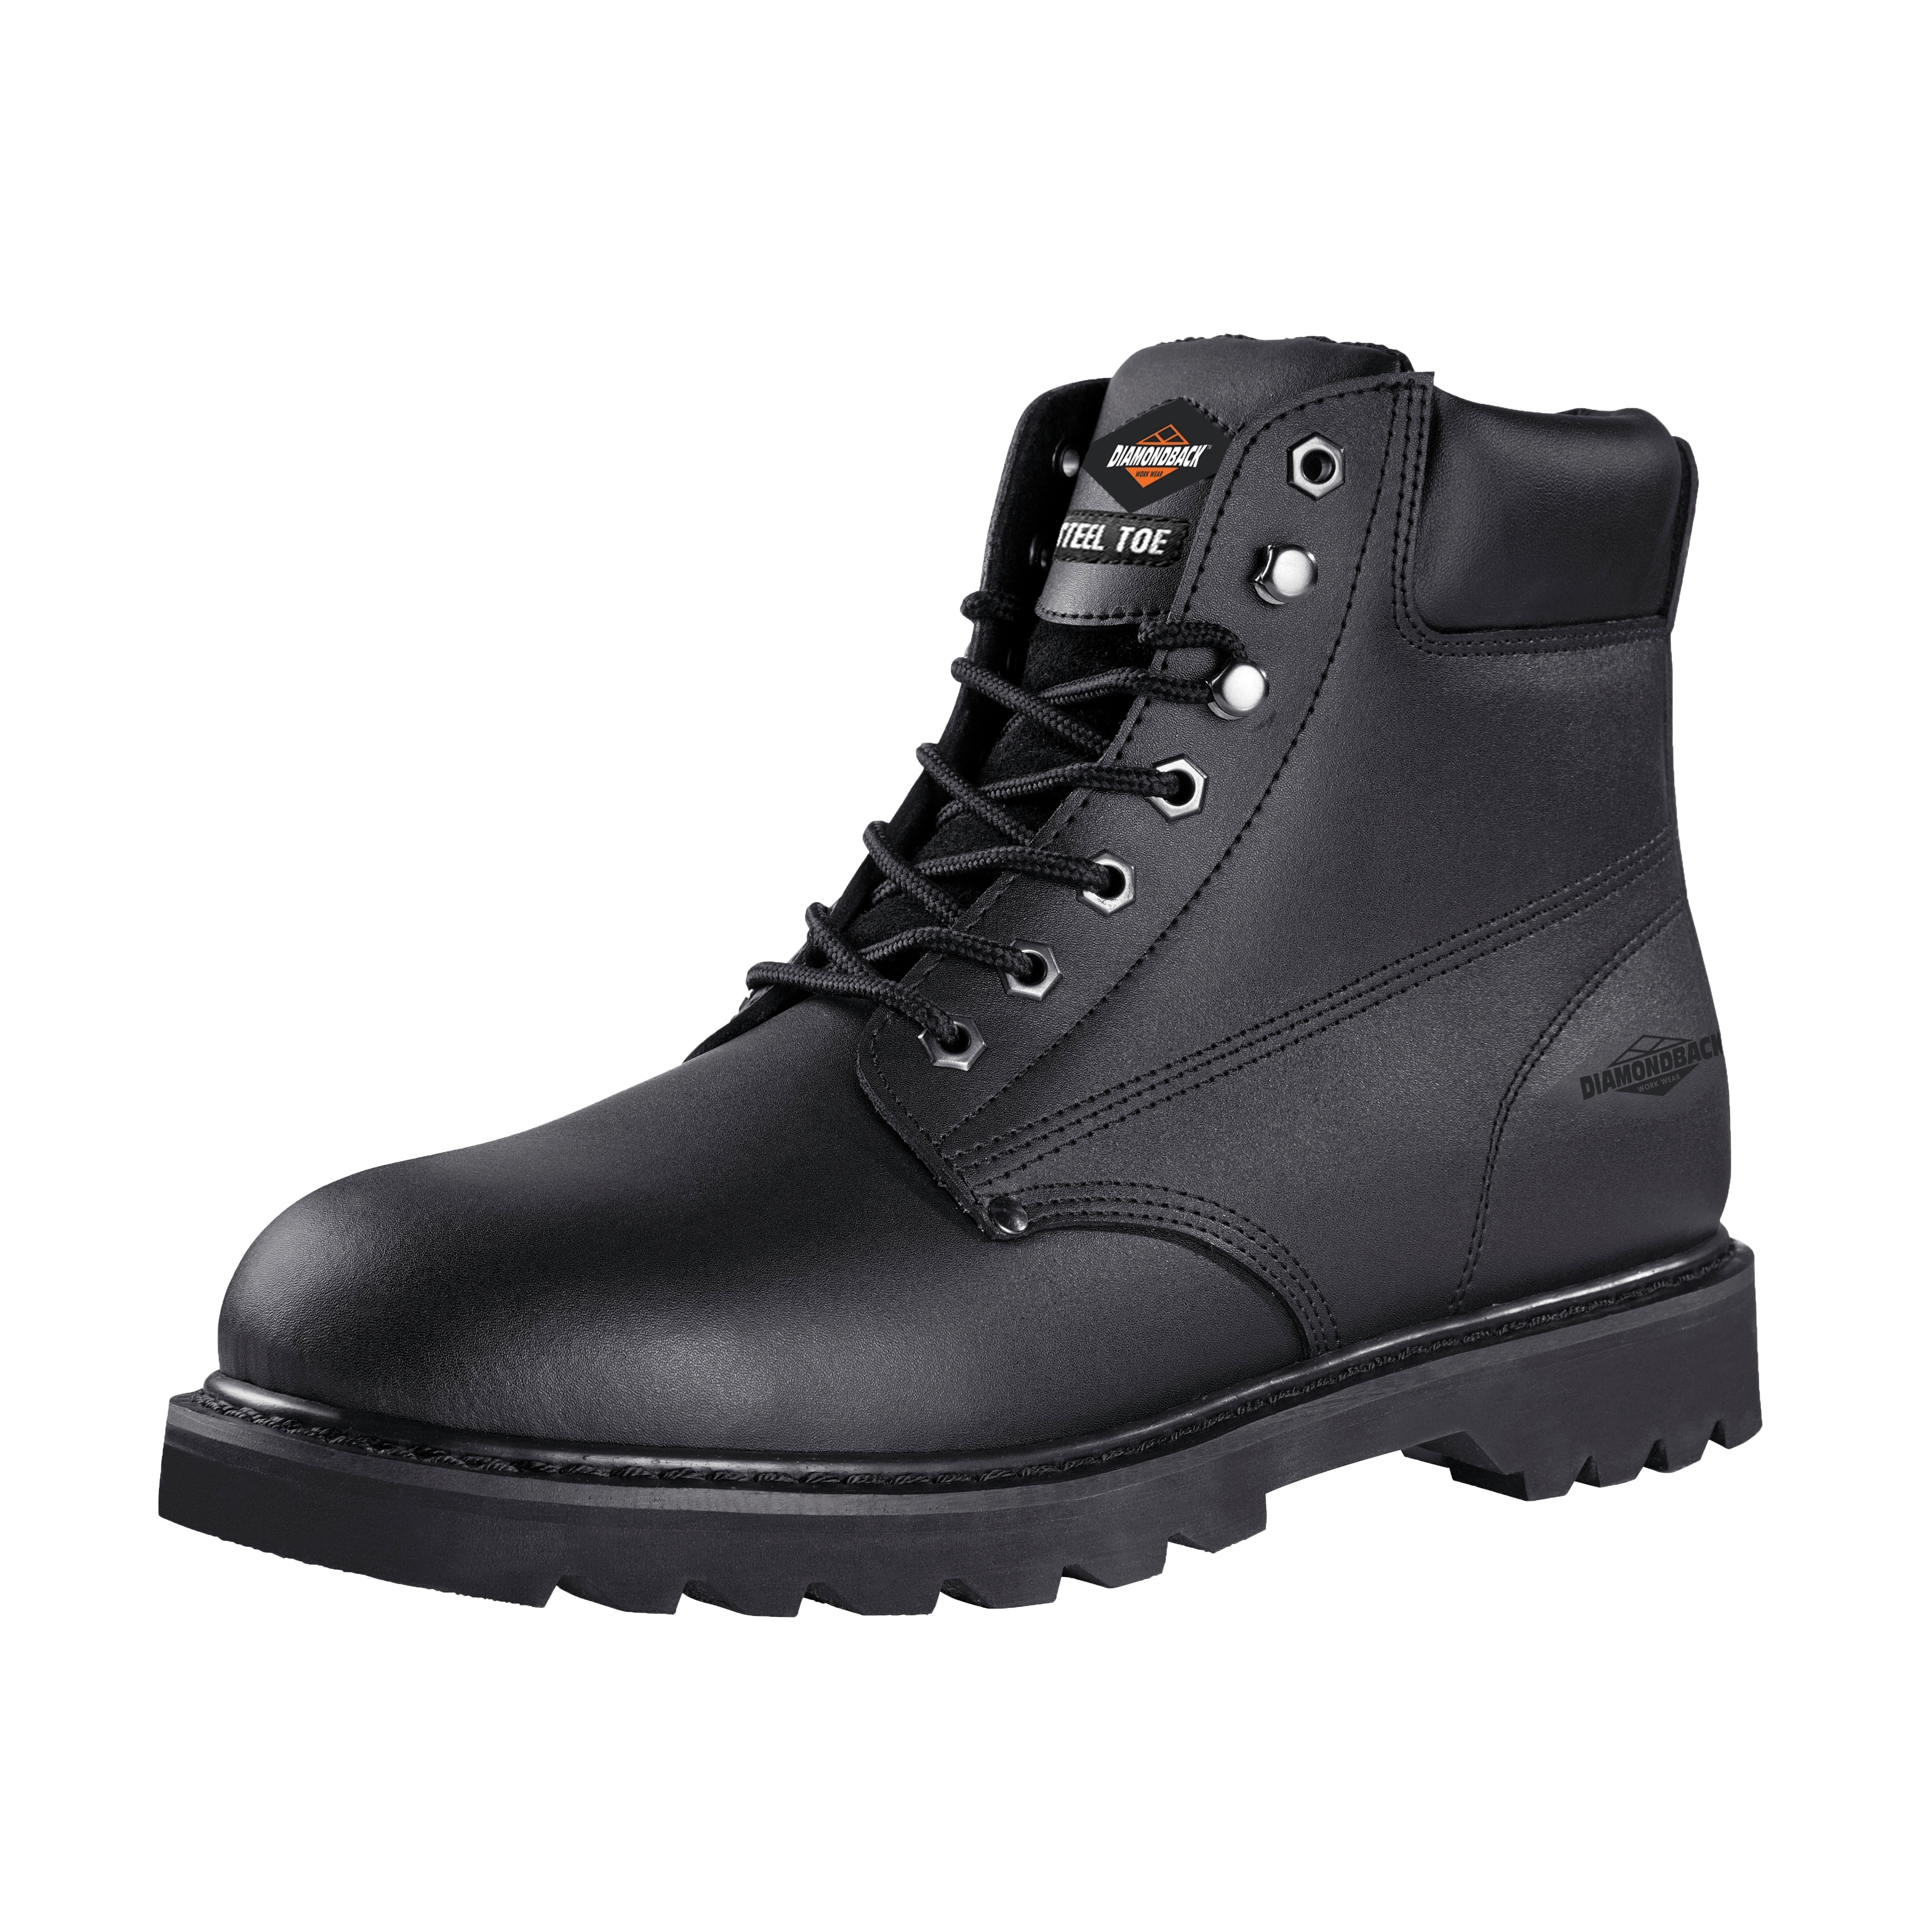 655SS-11 Work Boots, 11, Medium Shoe Last W, Black, Leather Upper, Lace-Up Boots Closure, With Lining